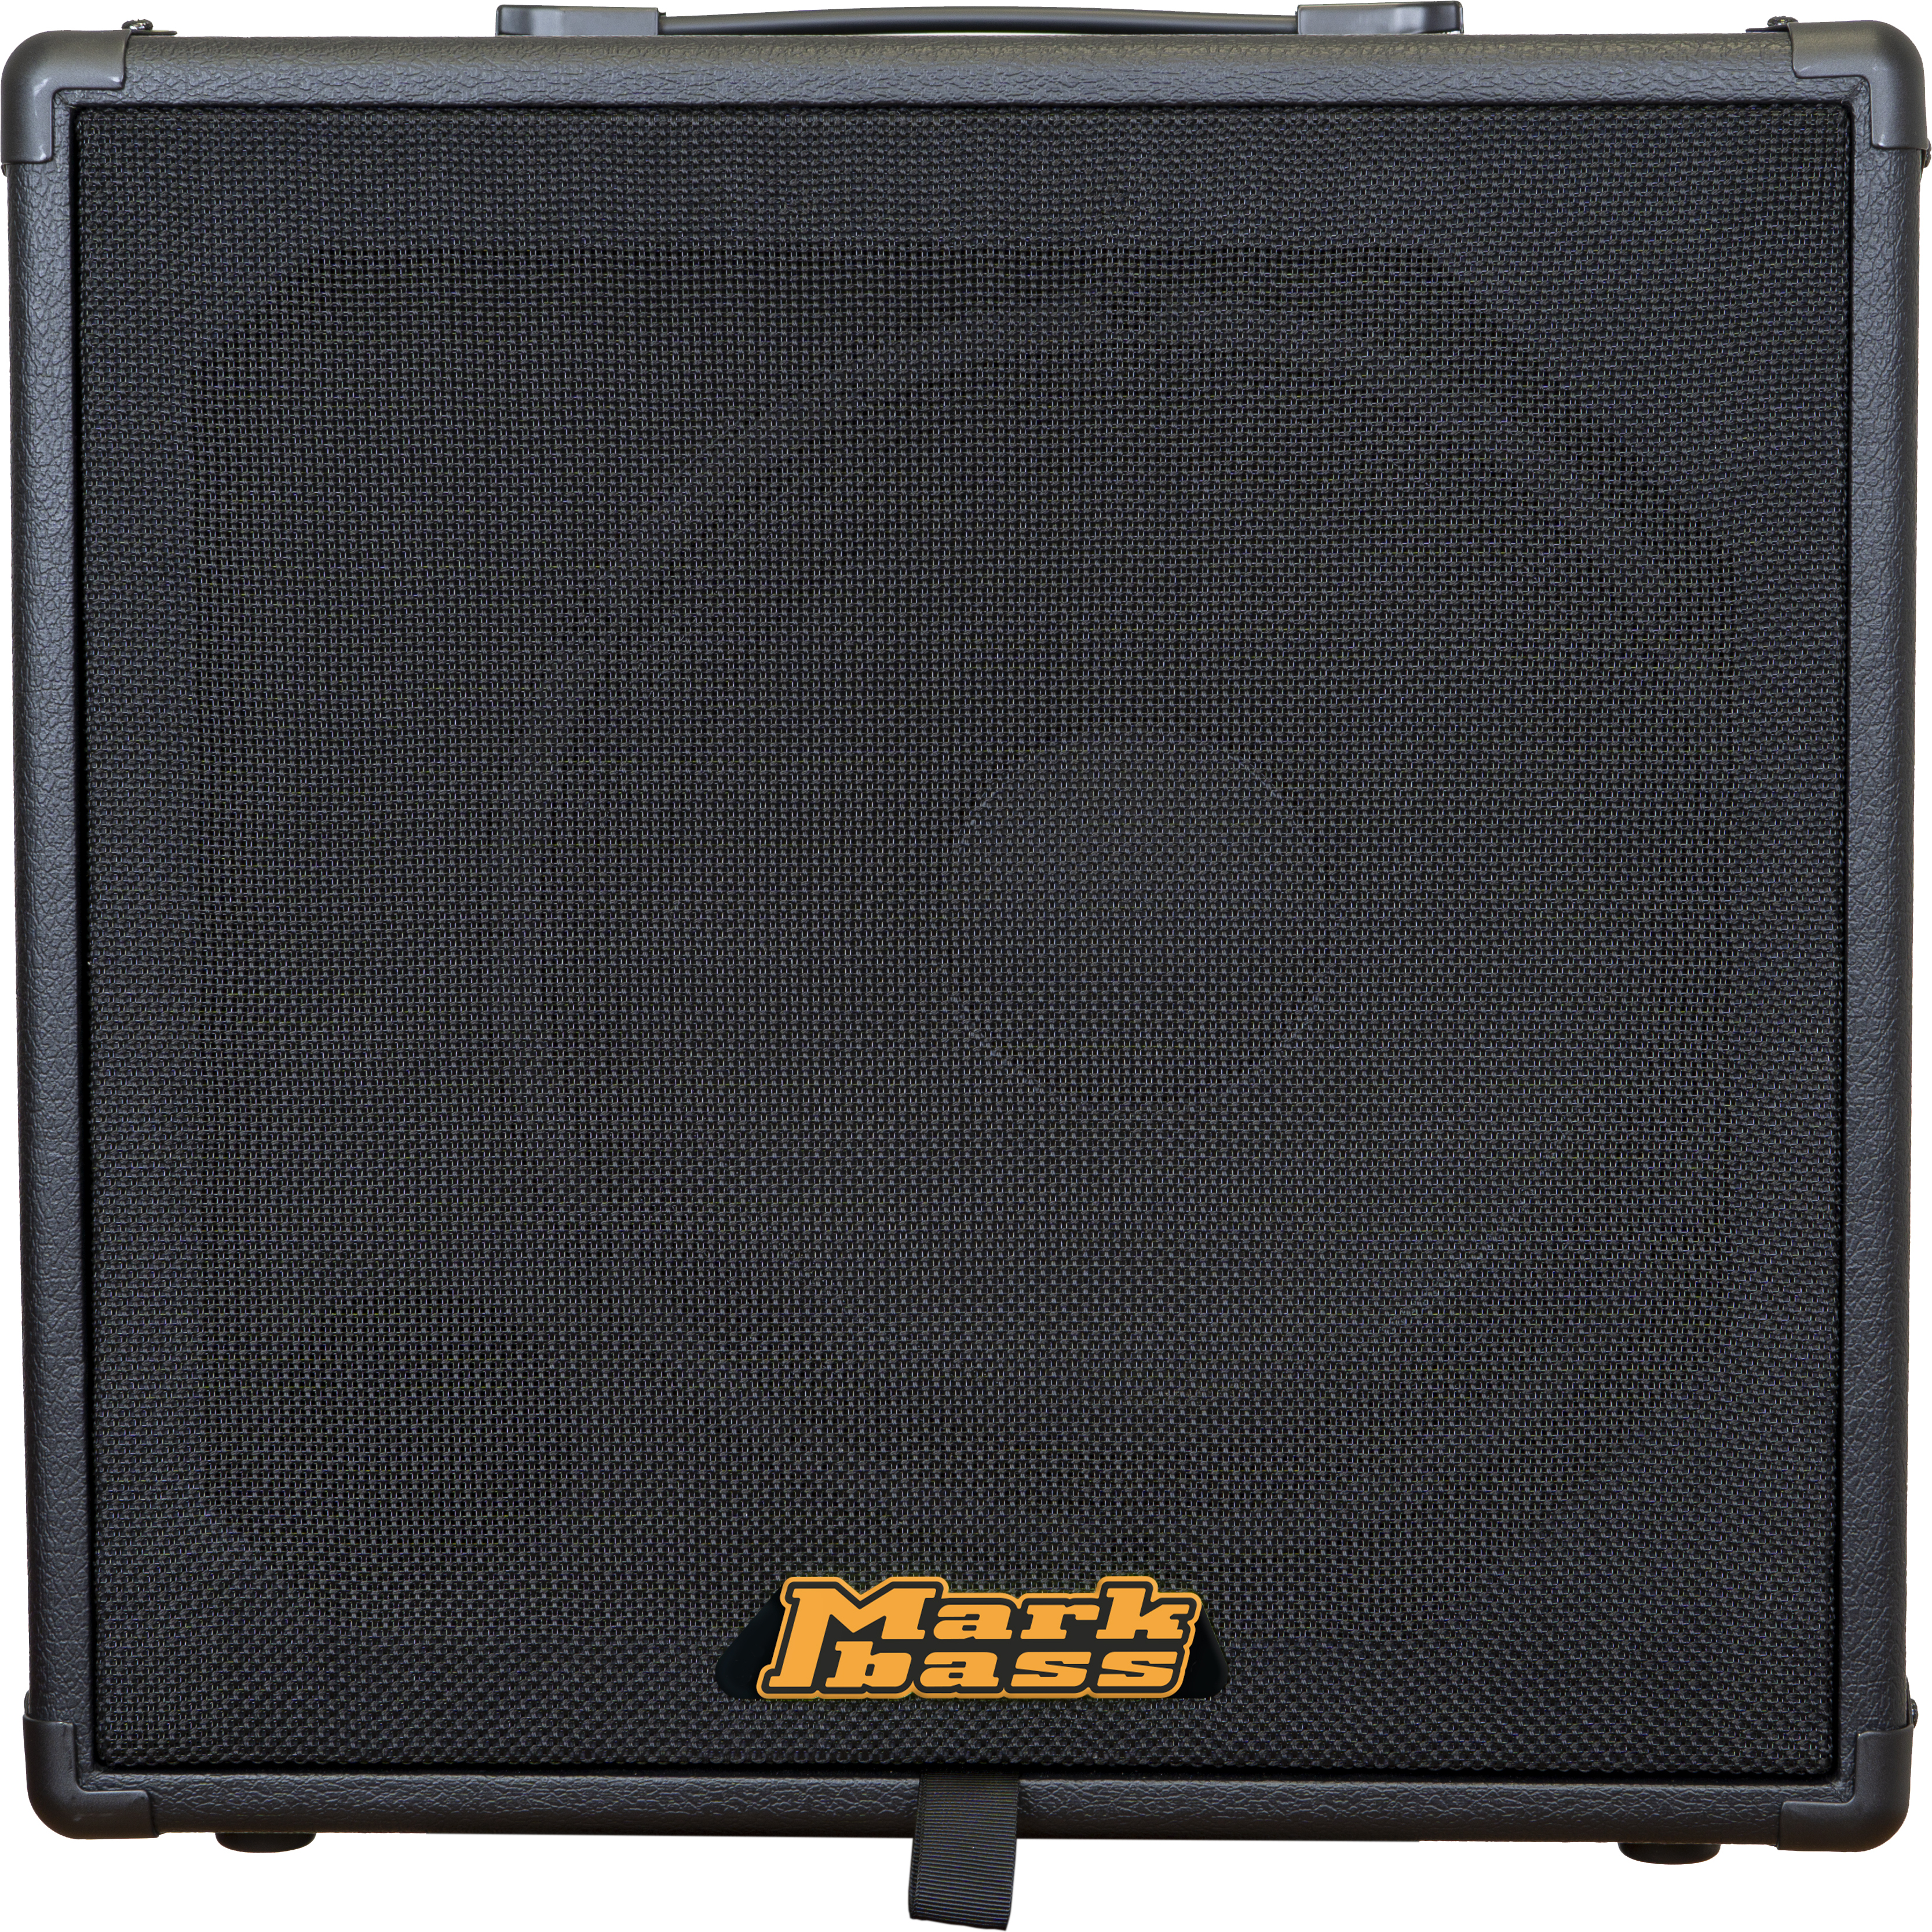 Markbass Cmb 121 Black Line Combo 150w 1x12 - Bass combo amp - Main picture